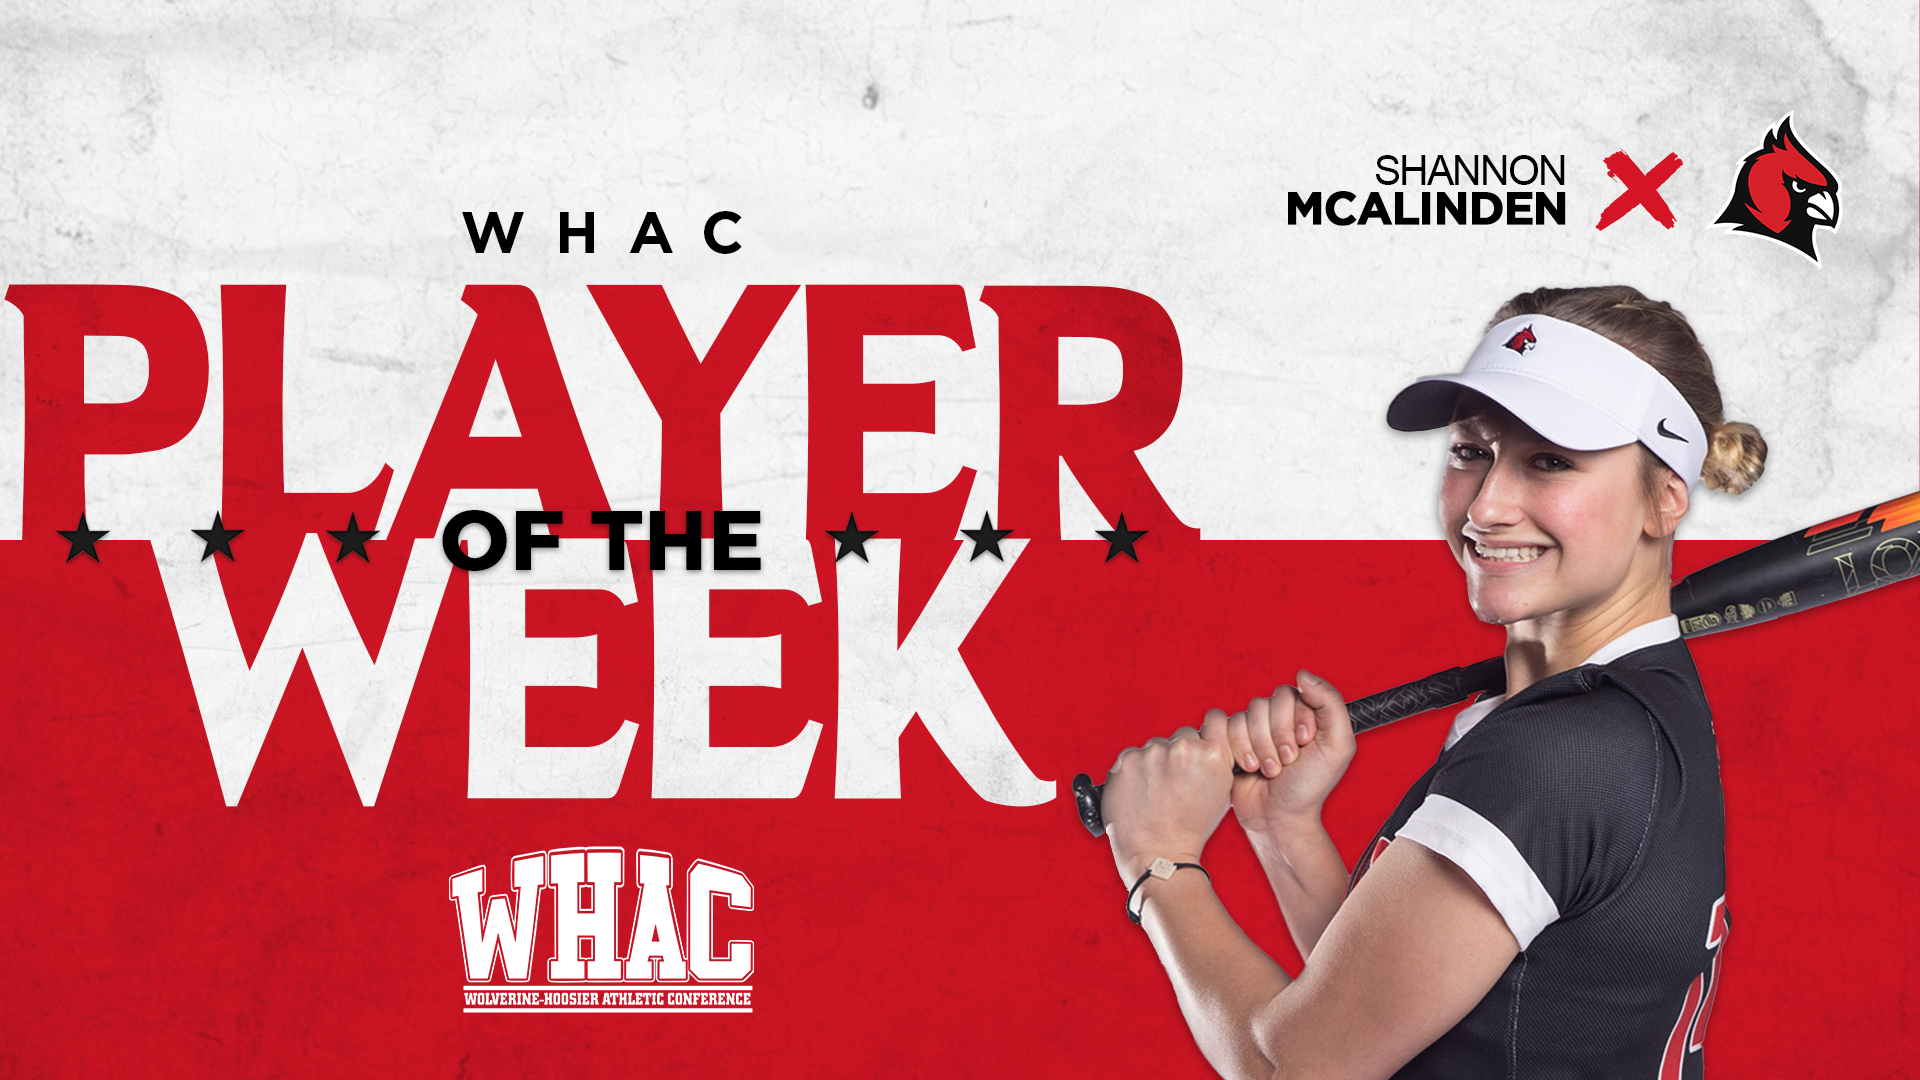 McAlinden takes home WHAC and NCCAA Player of the Week honors